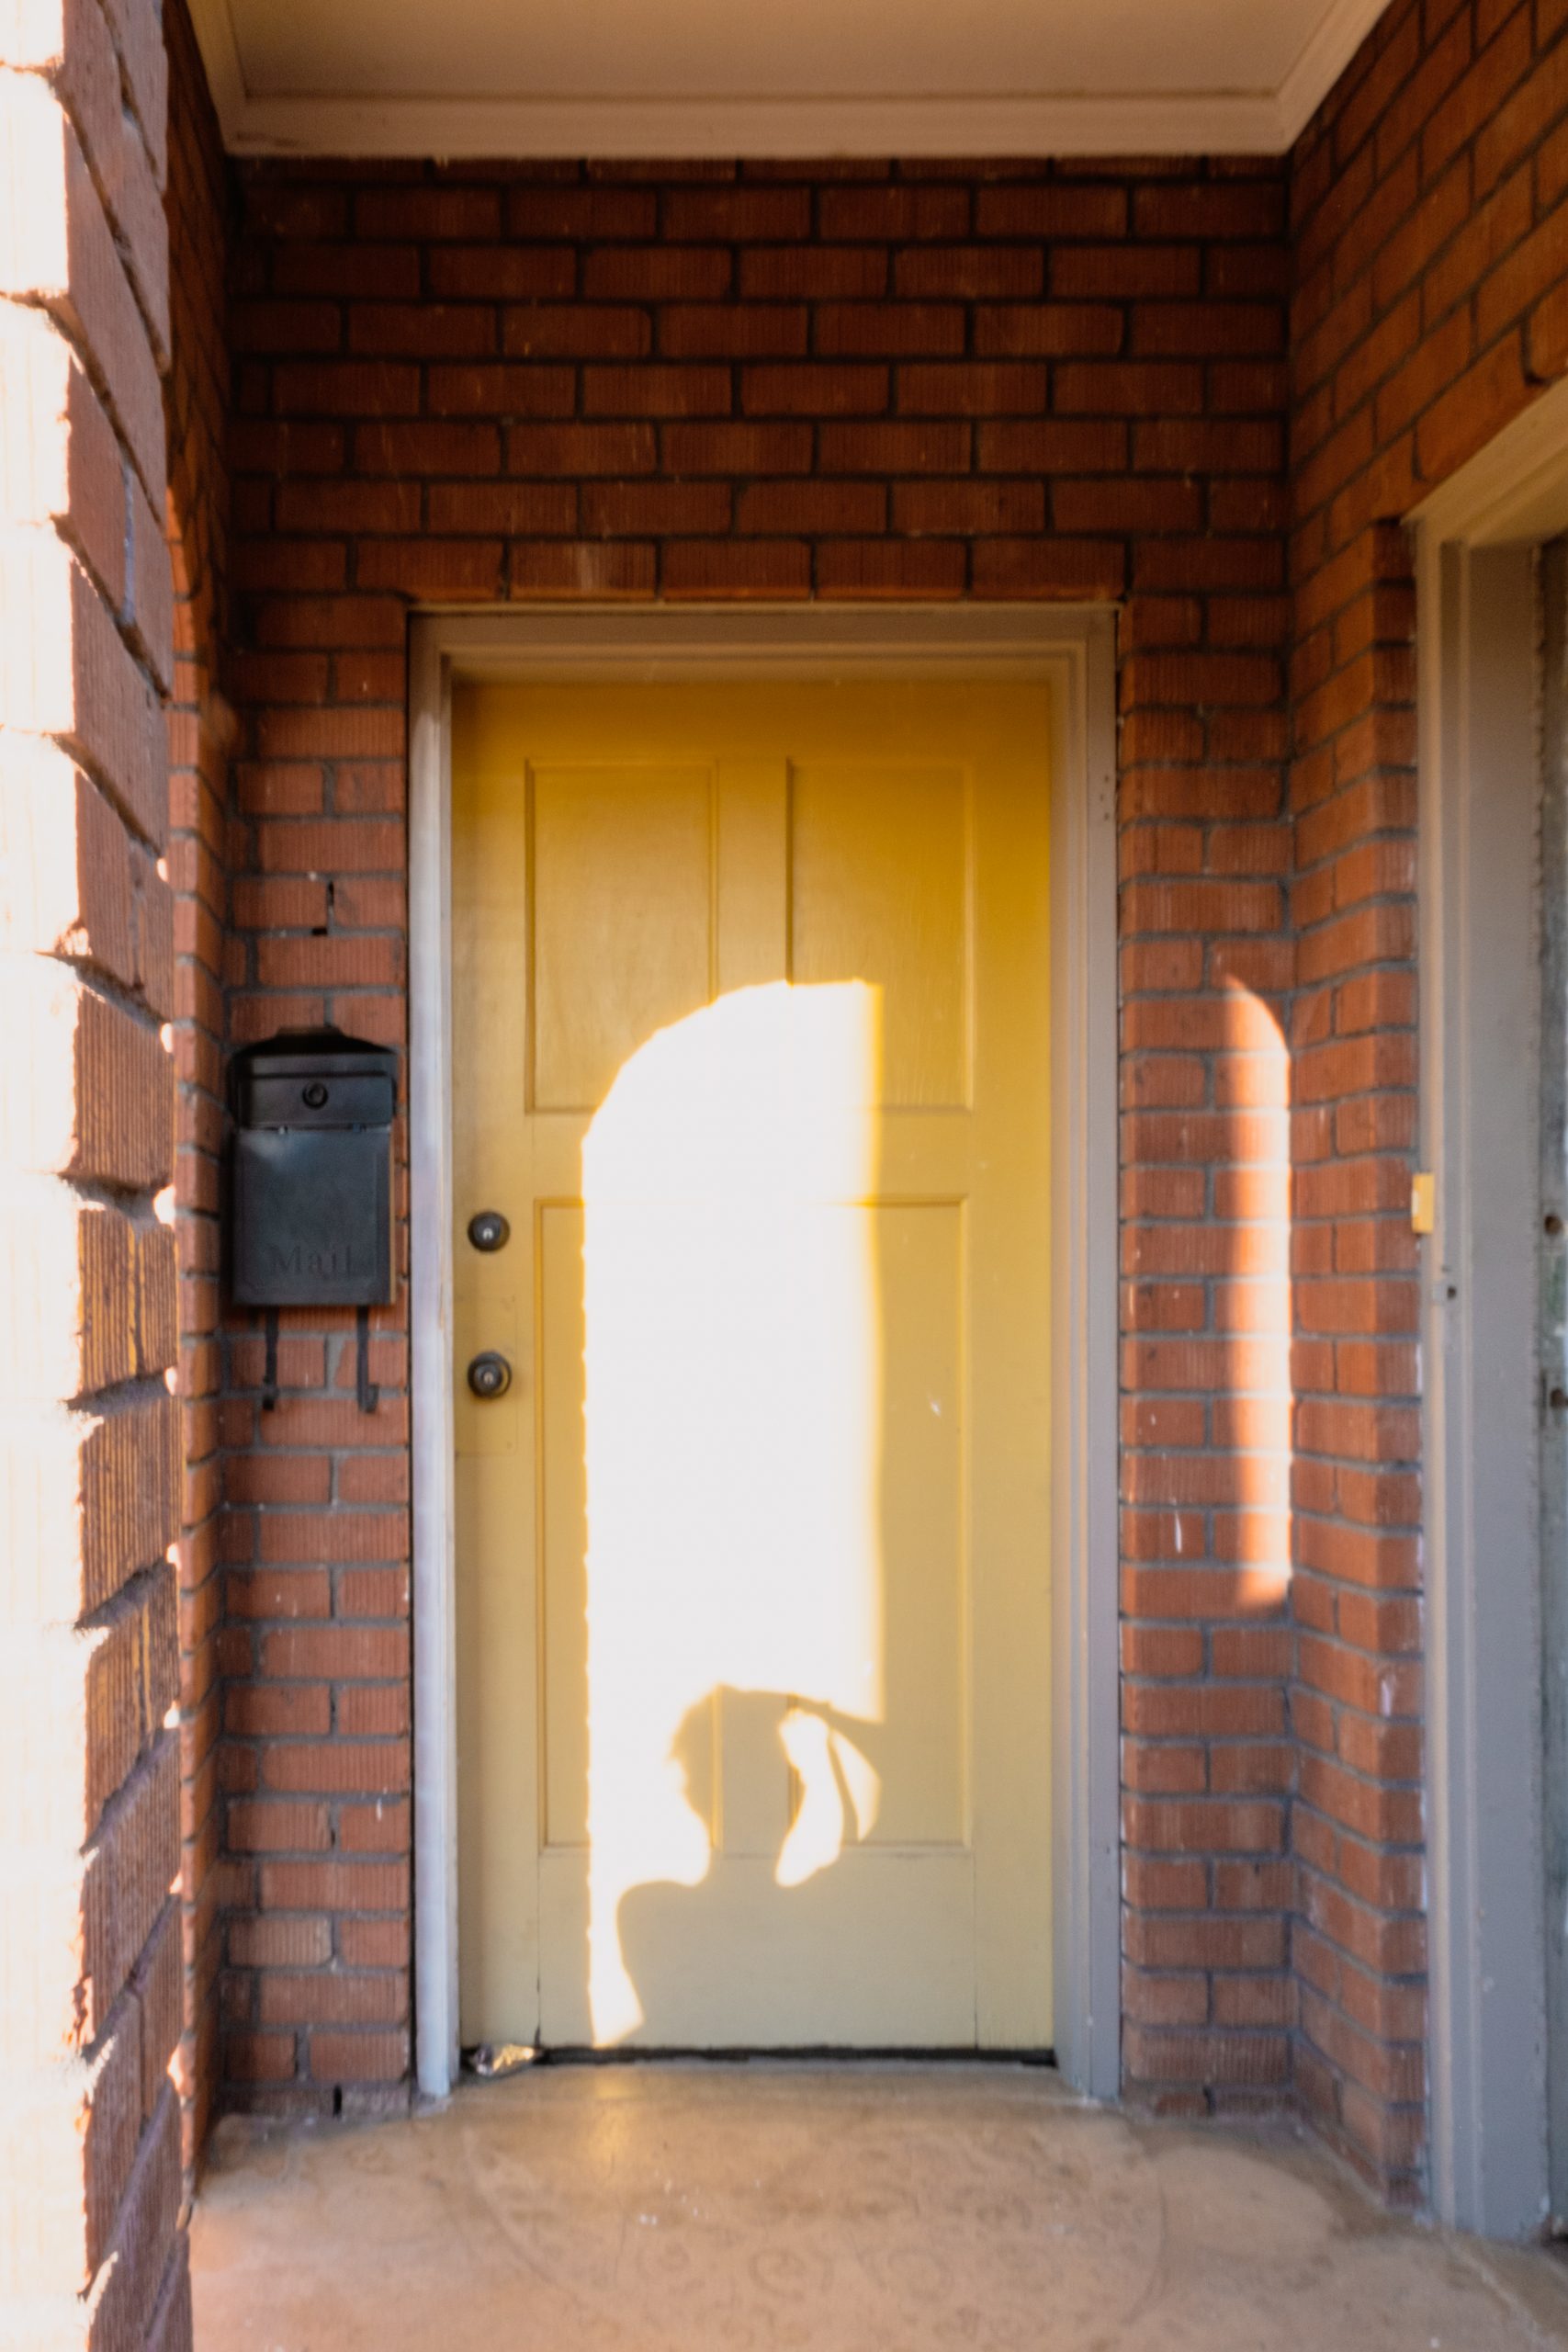 Photograph of a person's silhoutte as they take a photo in front of a yellow door surrounded by red bricks.